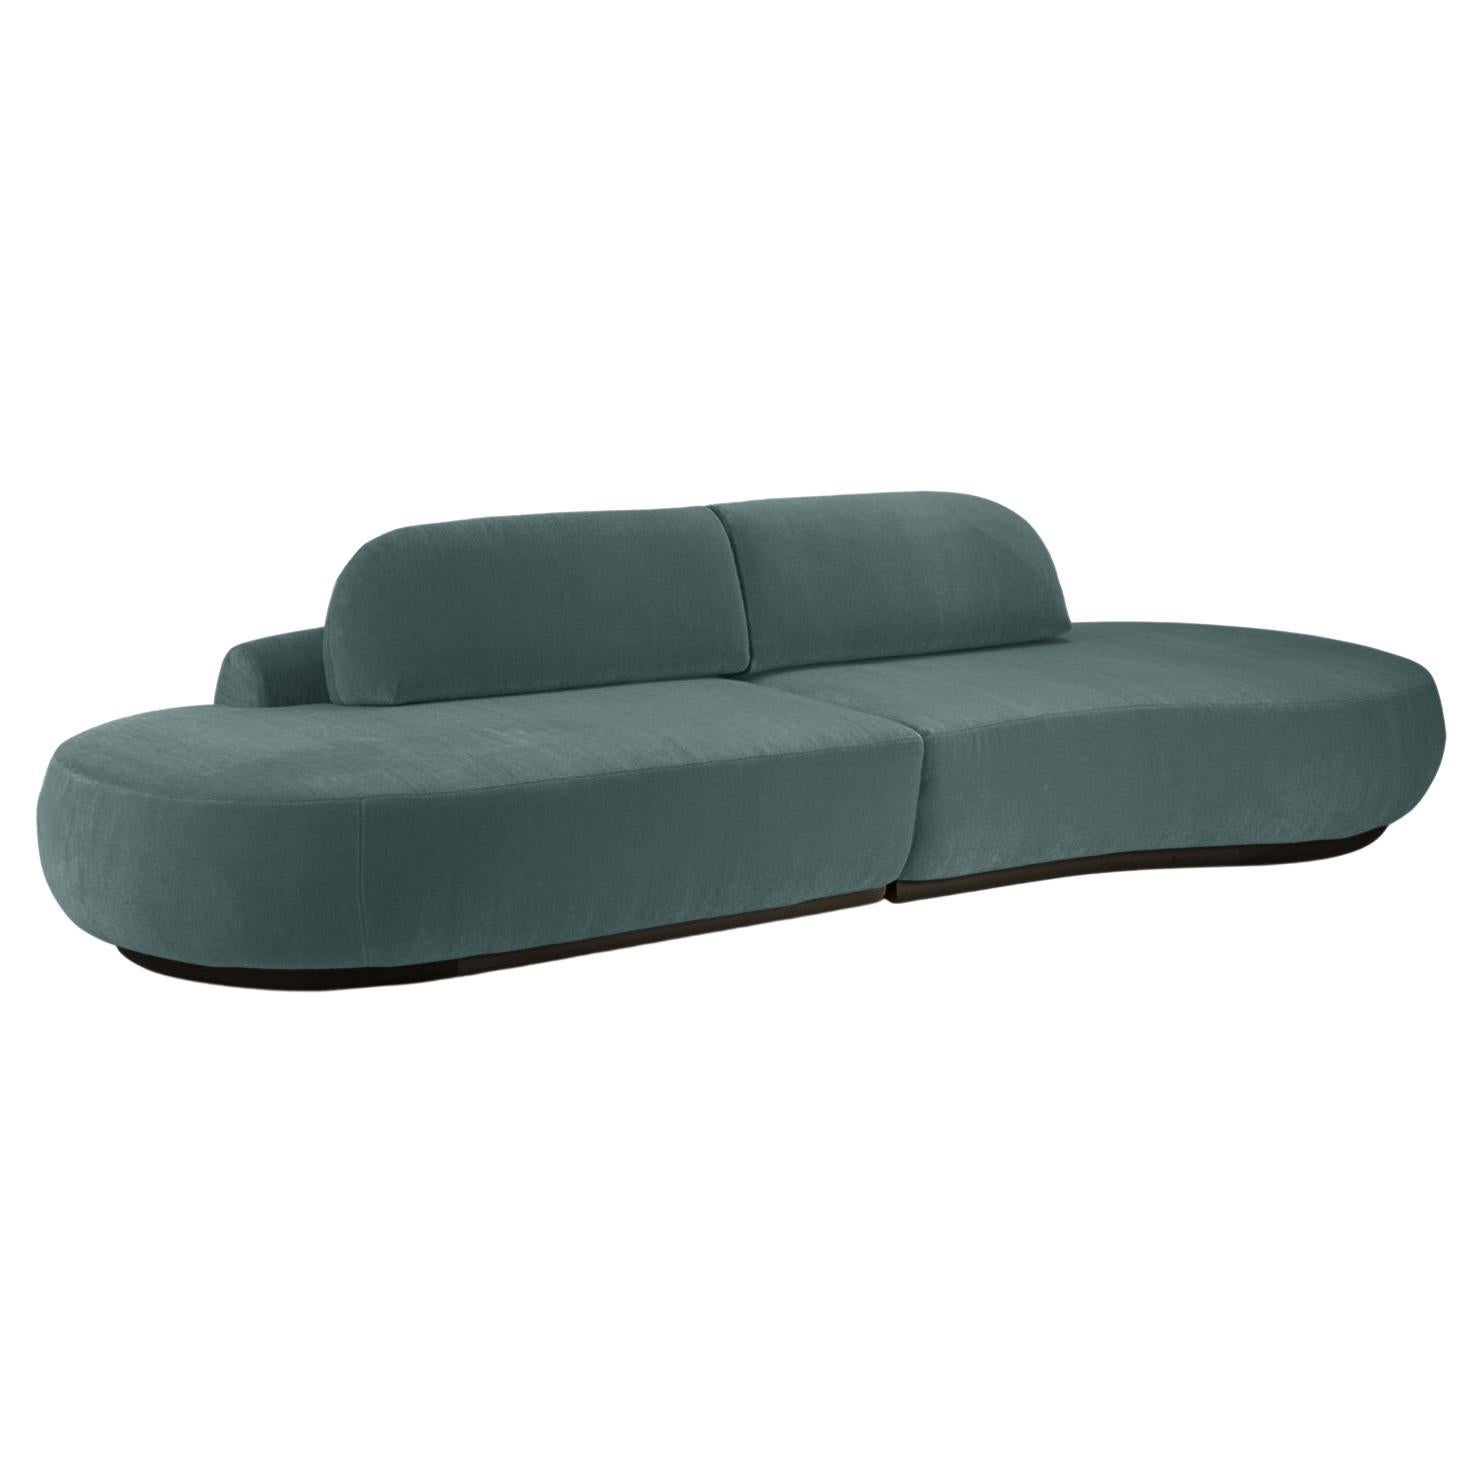 Naked Curved Sectional Sofa, 2 Piece with Beech Ash-056-5 and Teal For Sale